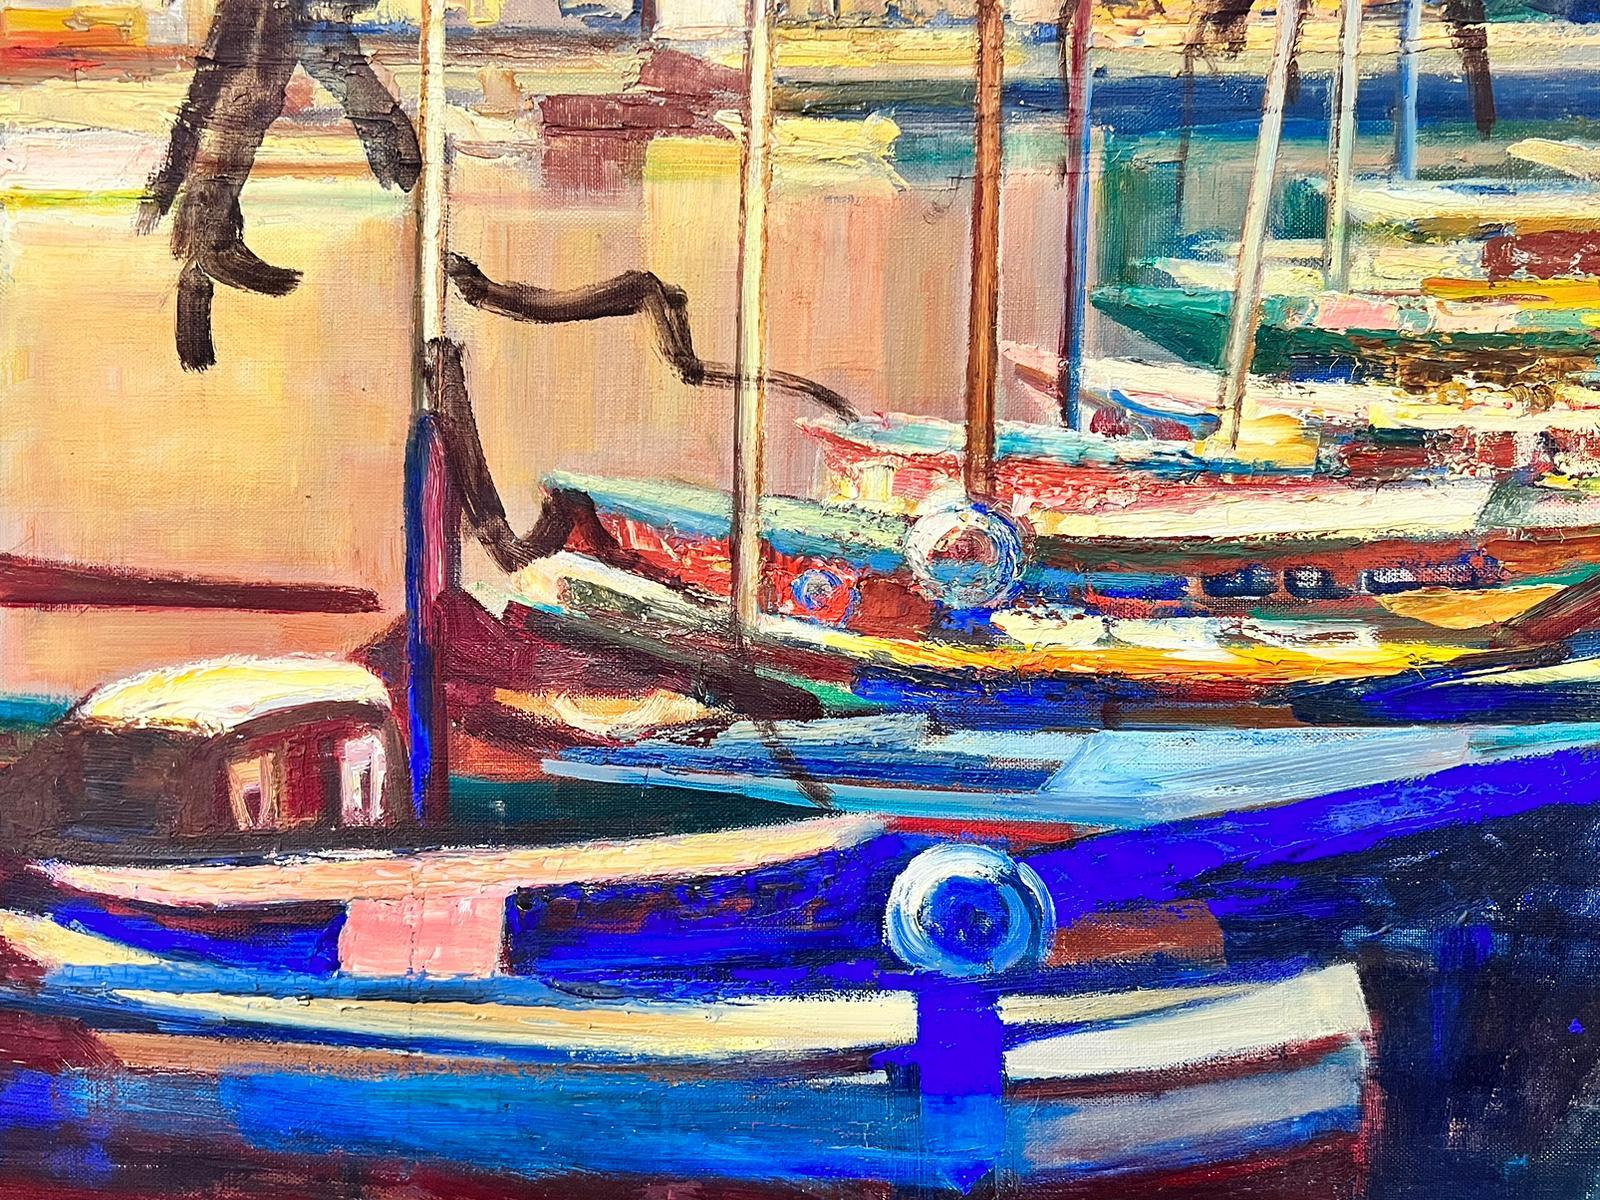 Sunset over Blue Boats in Harbor Very Large 1970’s French Signed Oil on Canvas - Painting by Josine Vignon